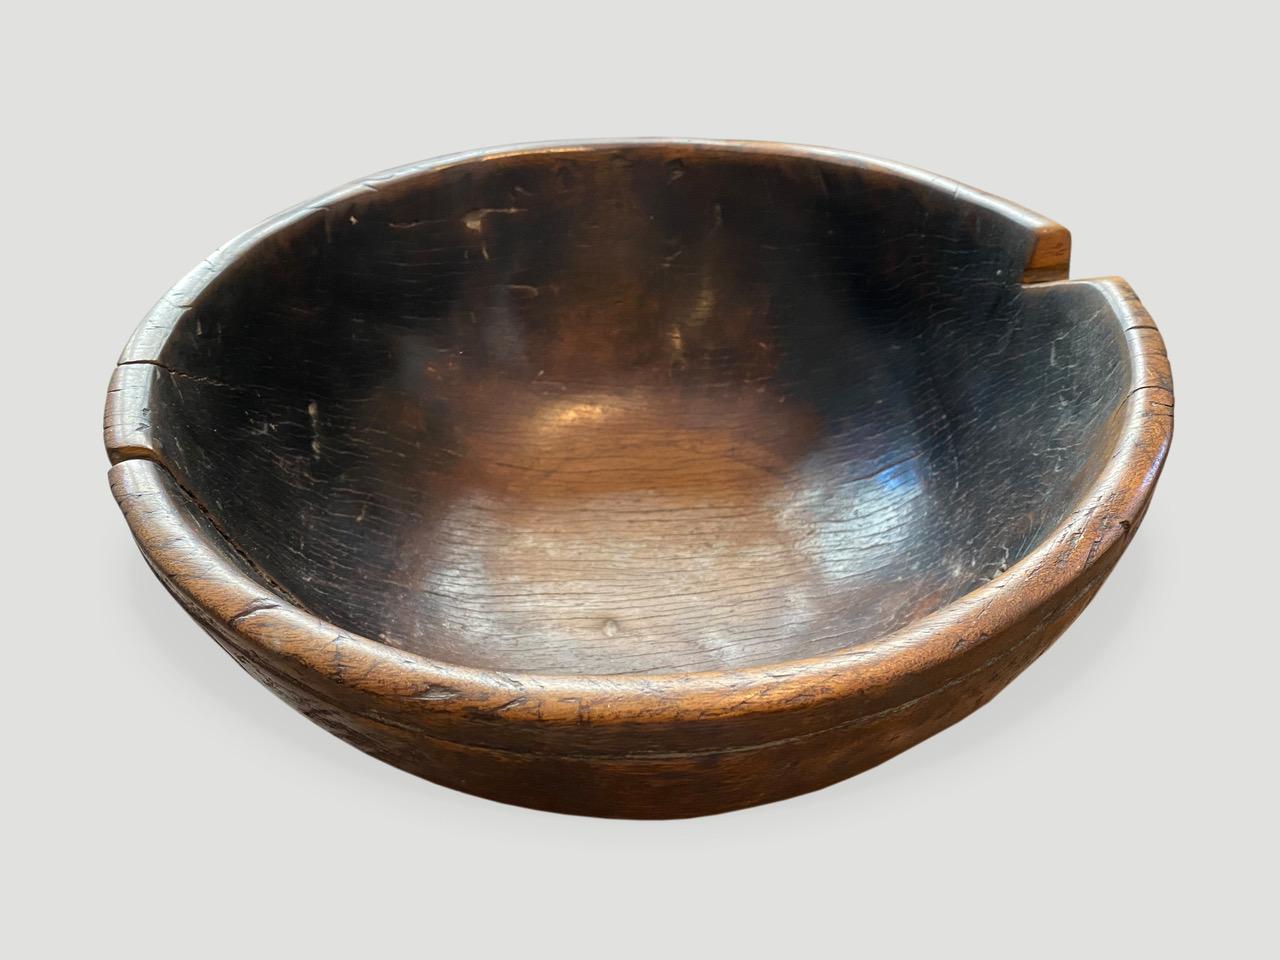 Beautiful antique bowl carved from a single piece of hardwood with stunning patina, mid 20th century

This bowl was sourced in the spirit of wabi-sabi, a Japanese philosophy that beauty can be found in imperfection and impermanence. It is a beauty